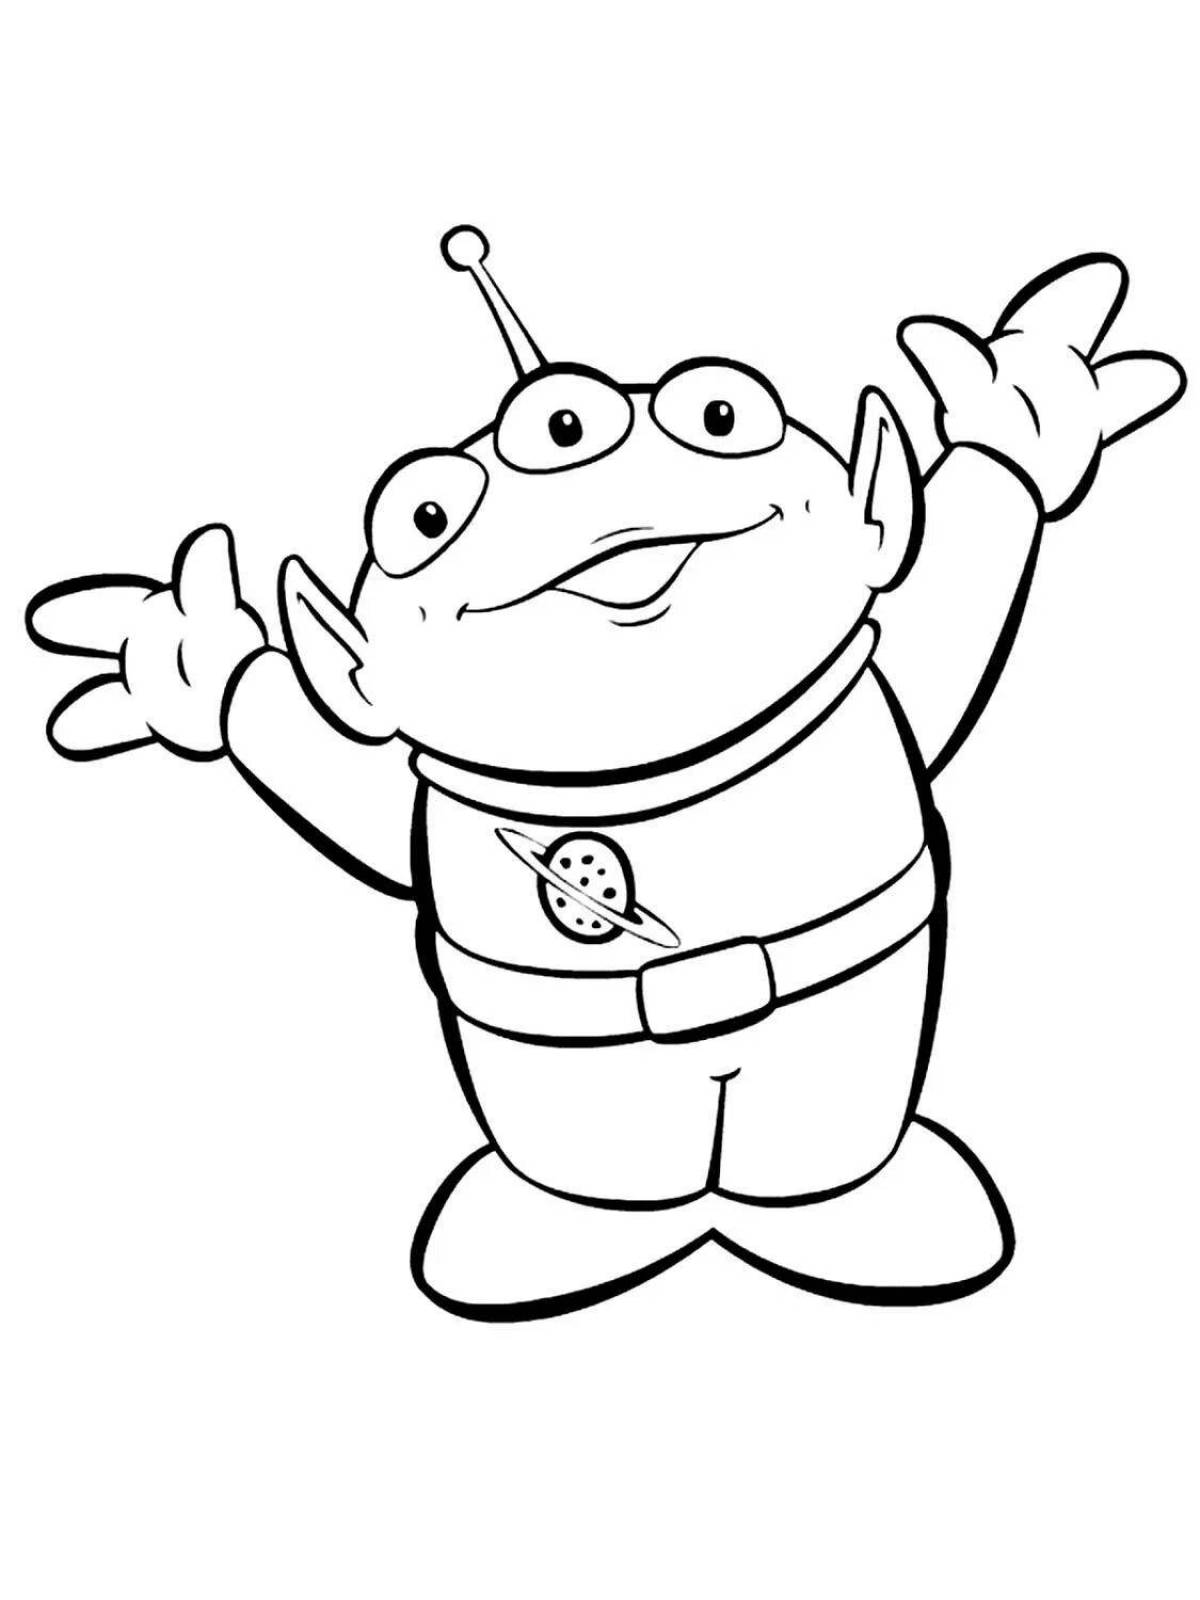 Color-party aliens coloring page for children